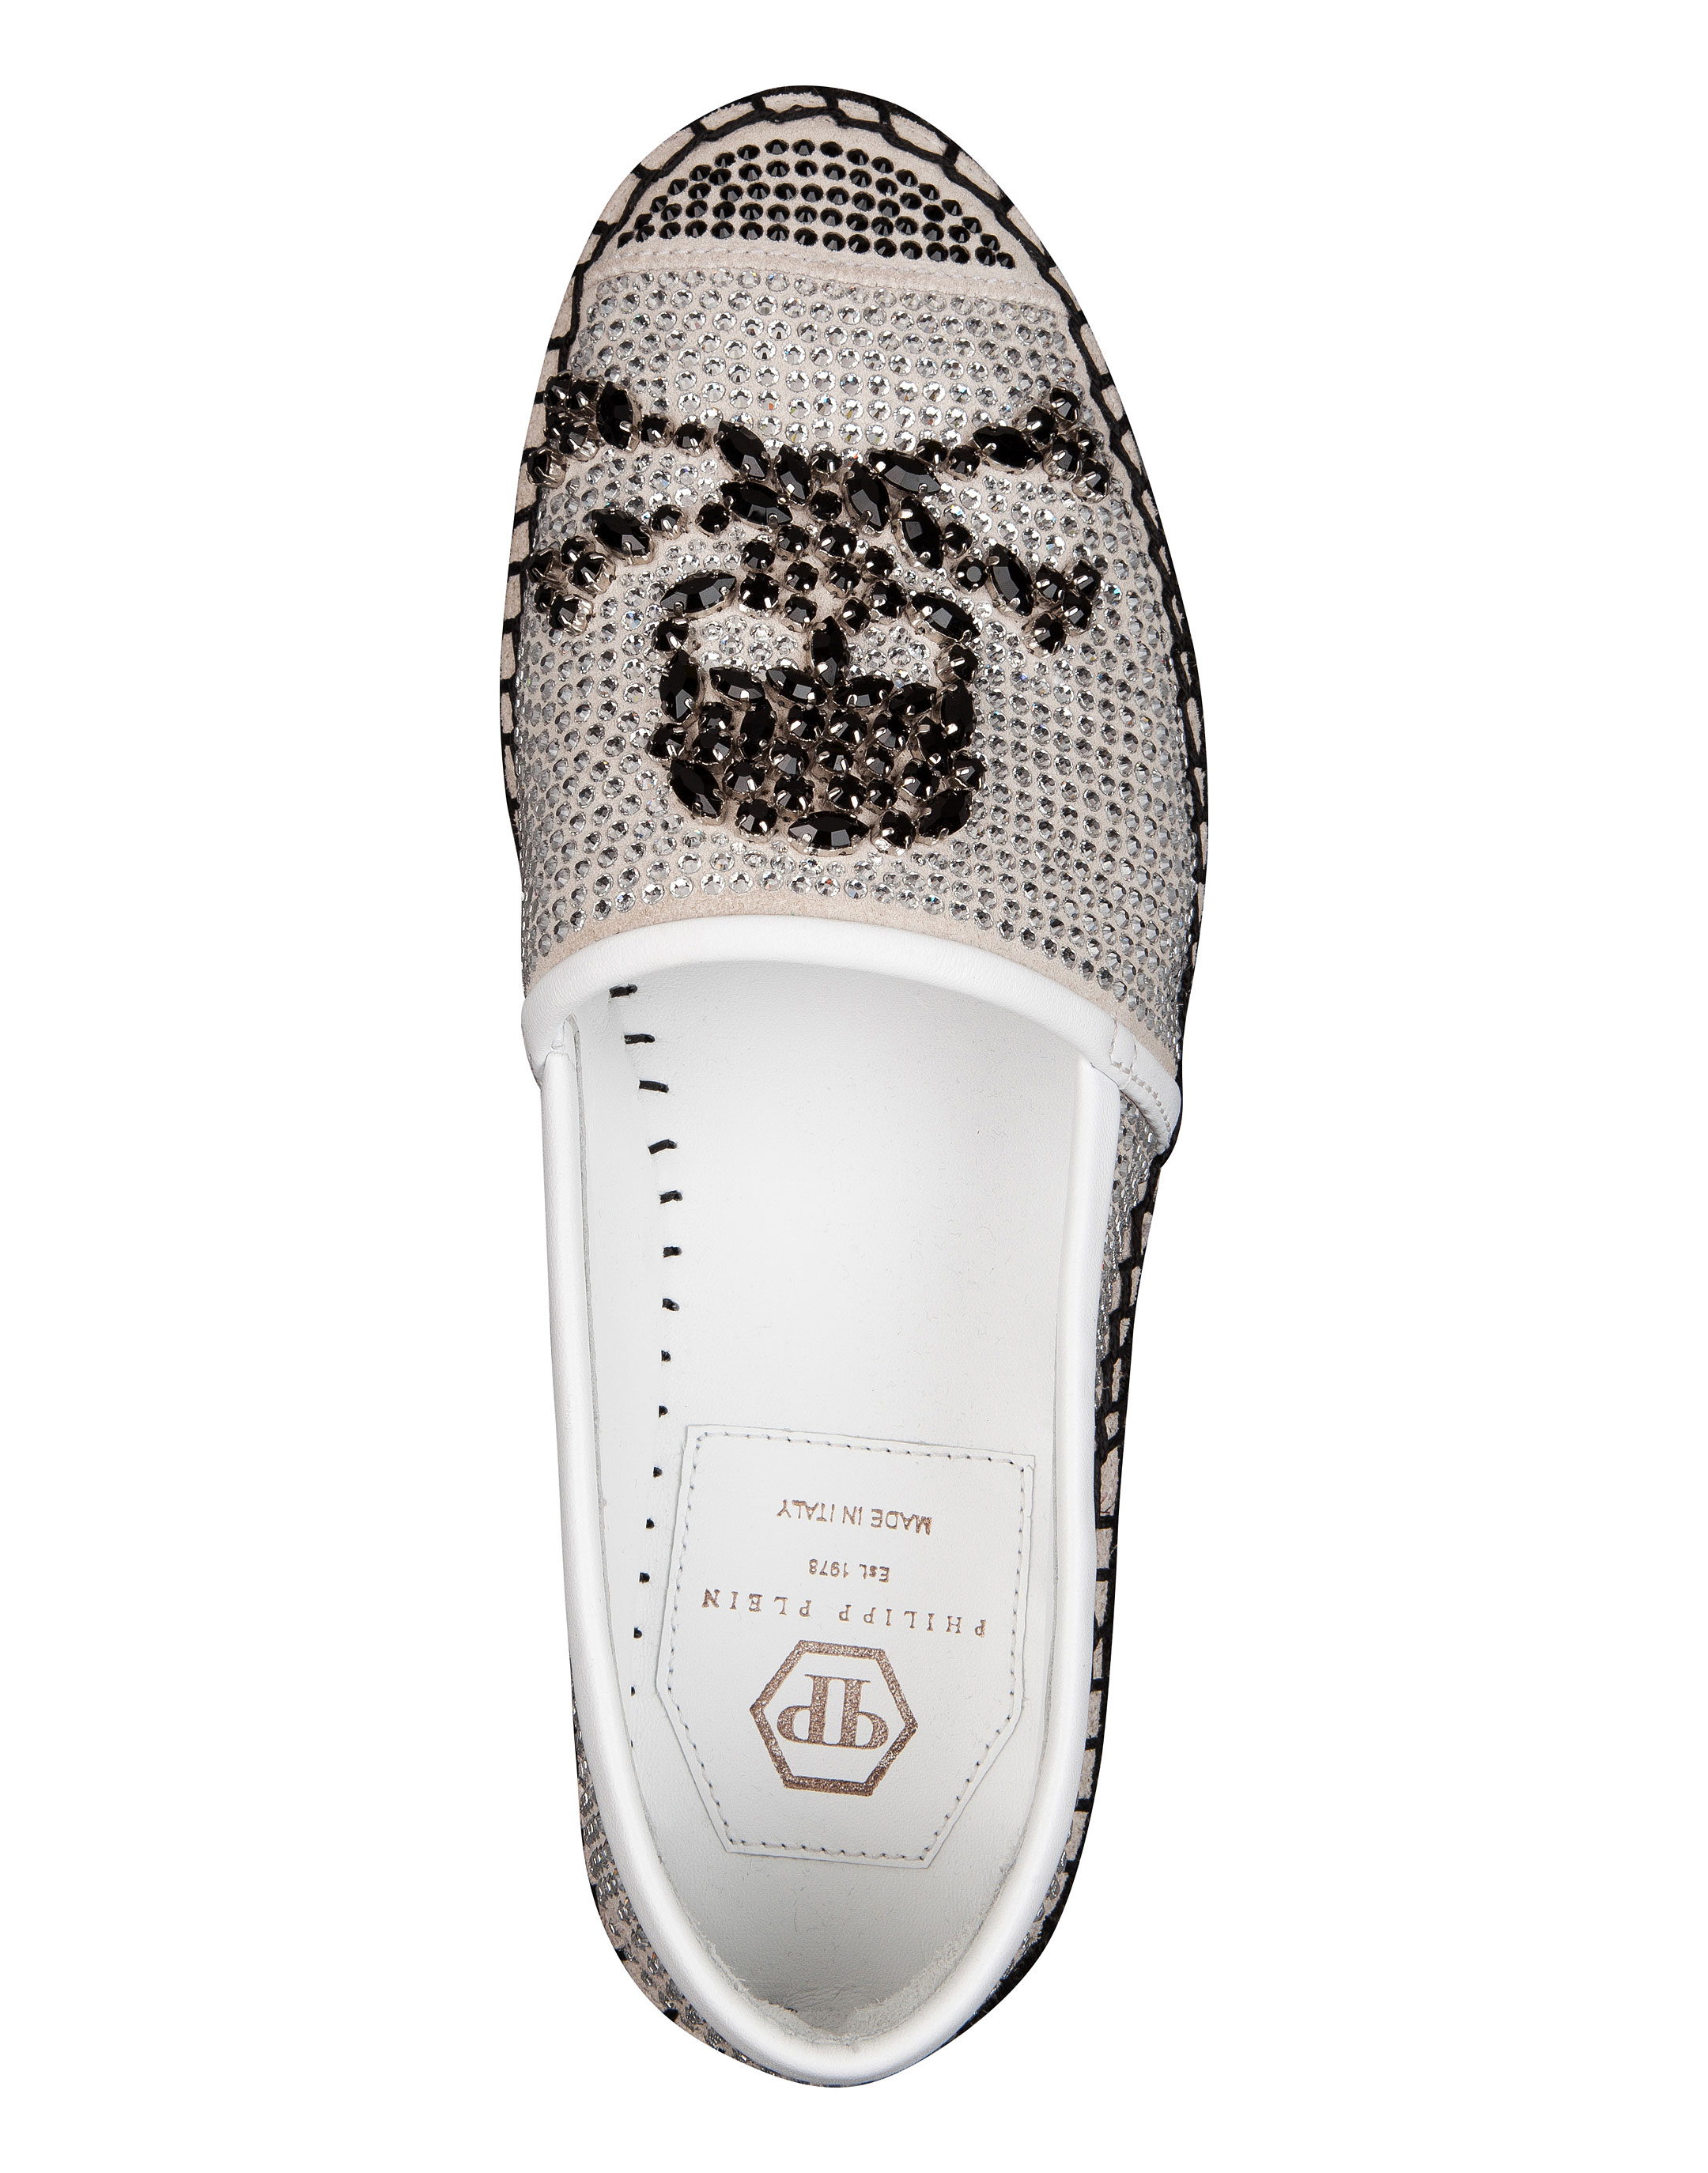 Espadrillas "Don't live here anymore" | Philipp Plein Outlet